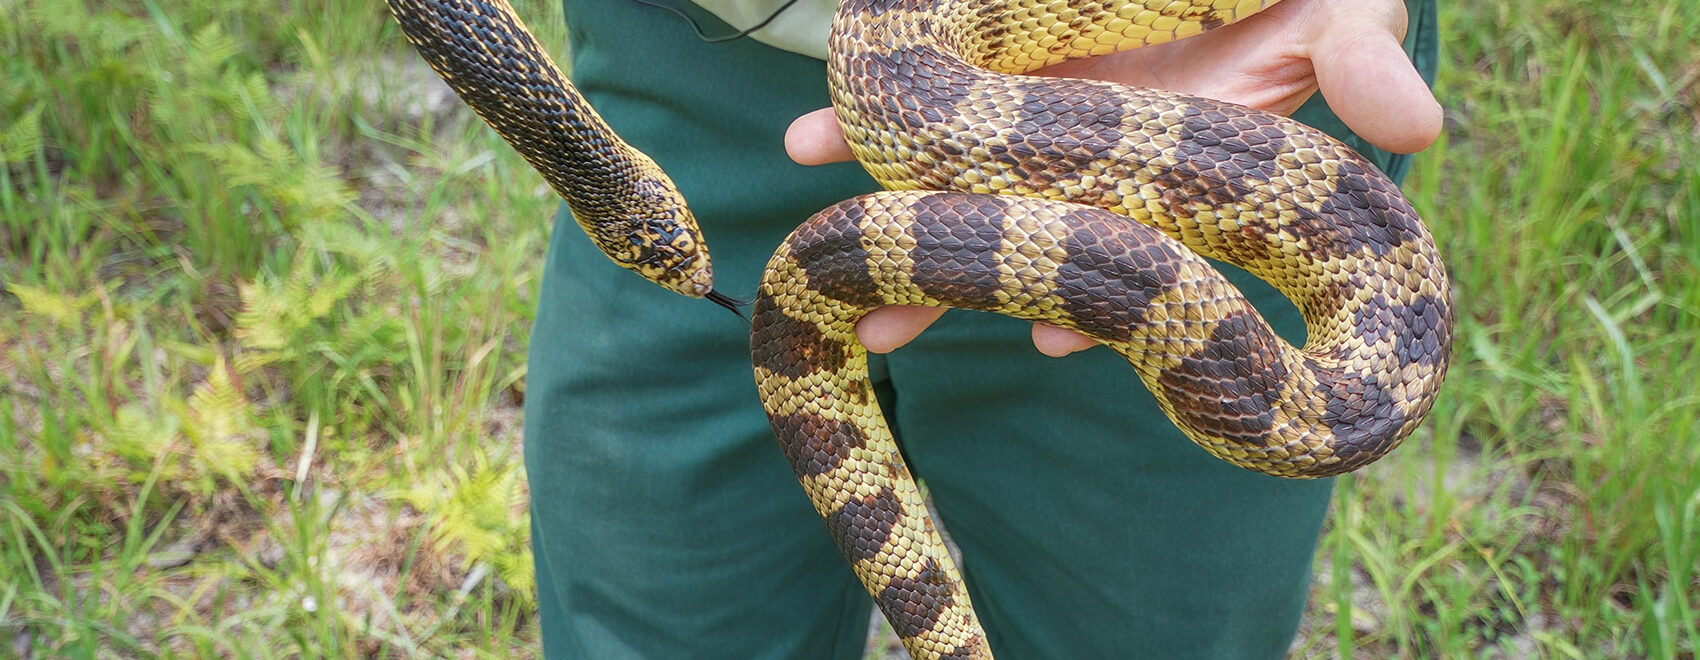 brown and tan striped Louisiana pine snake held by man wearing green pants